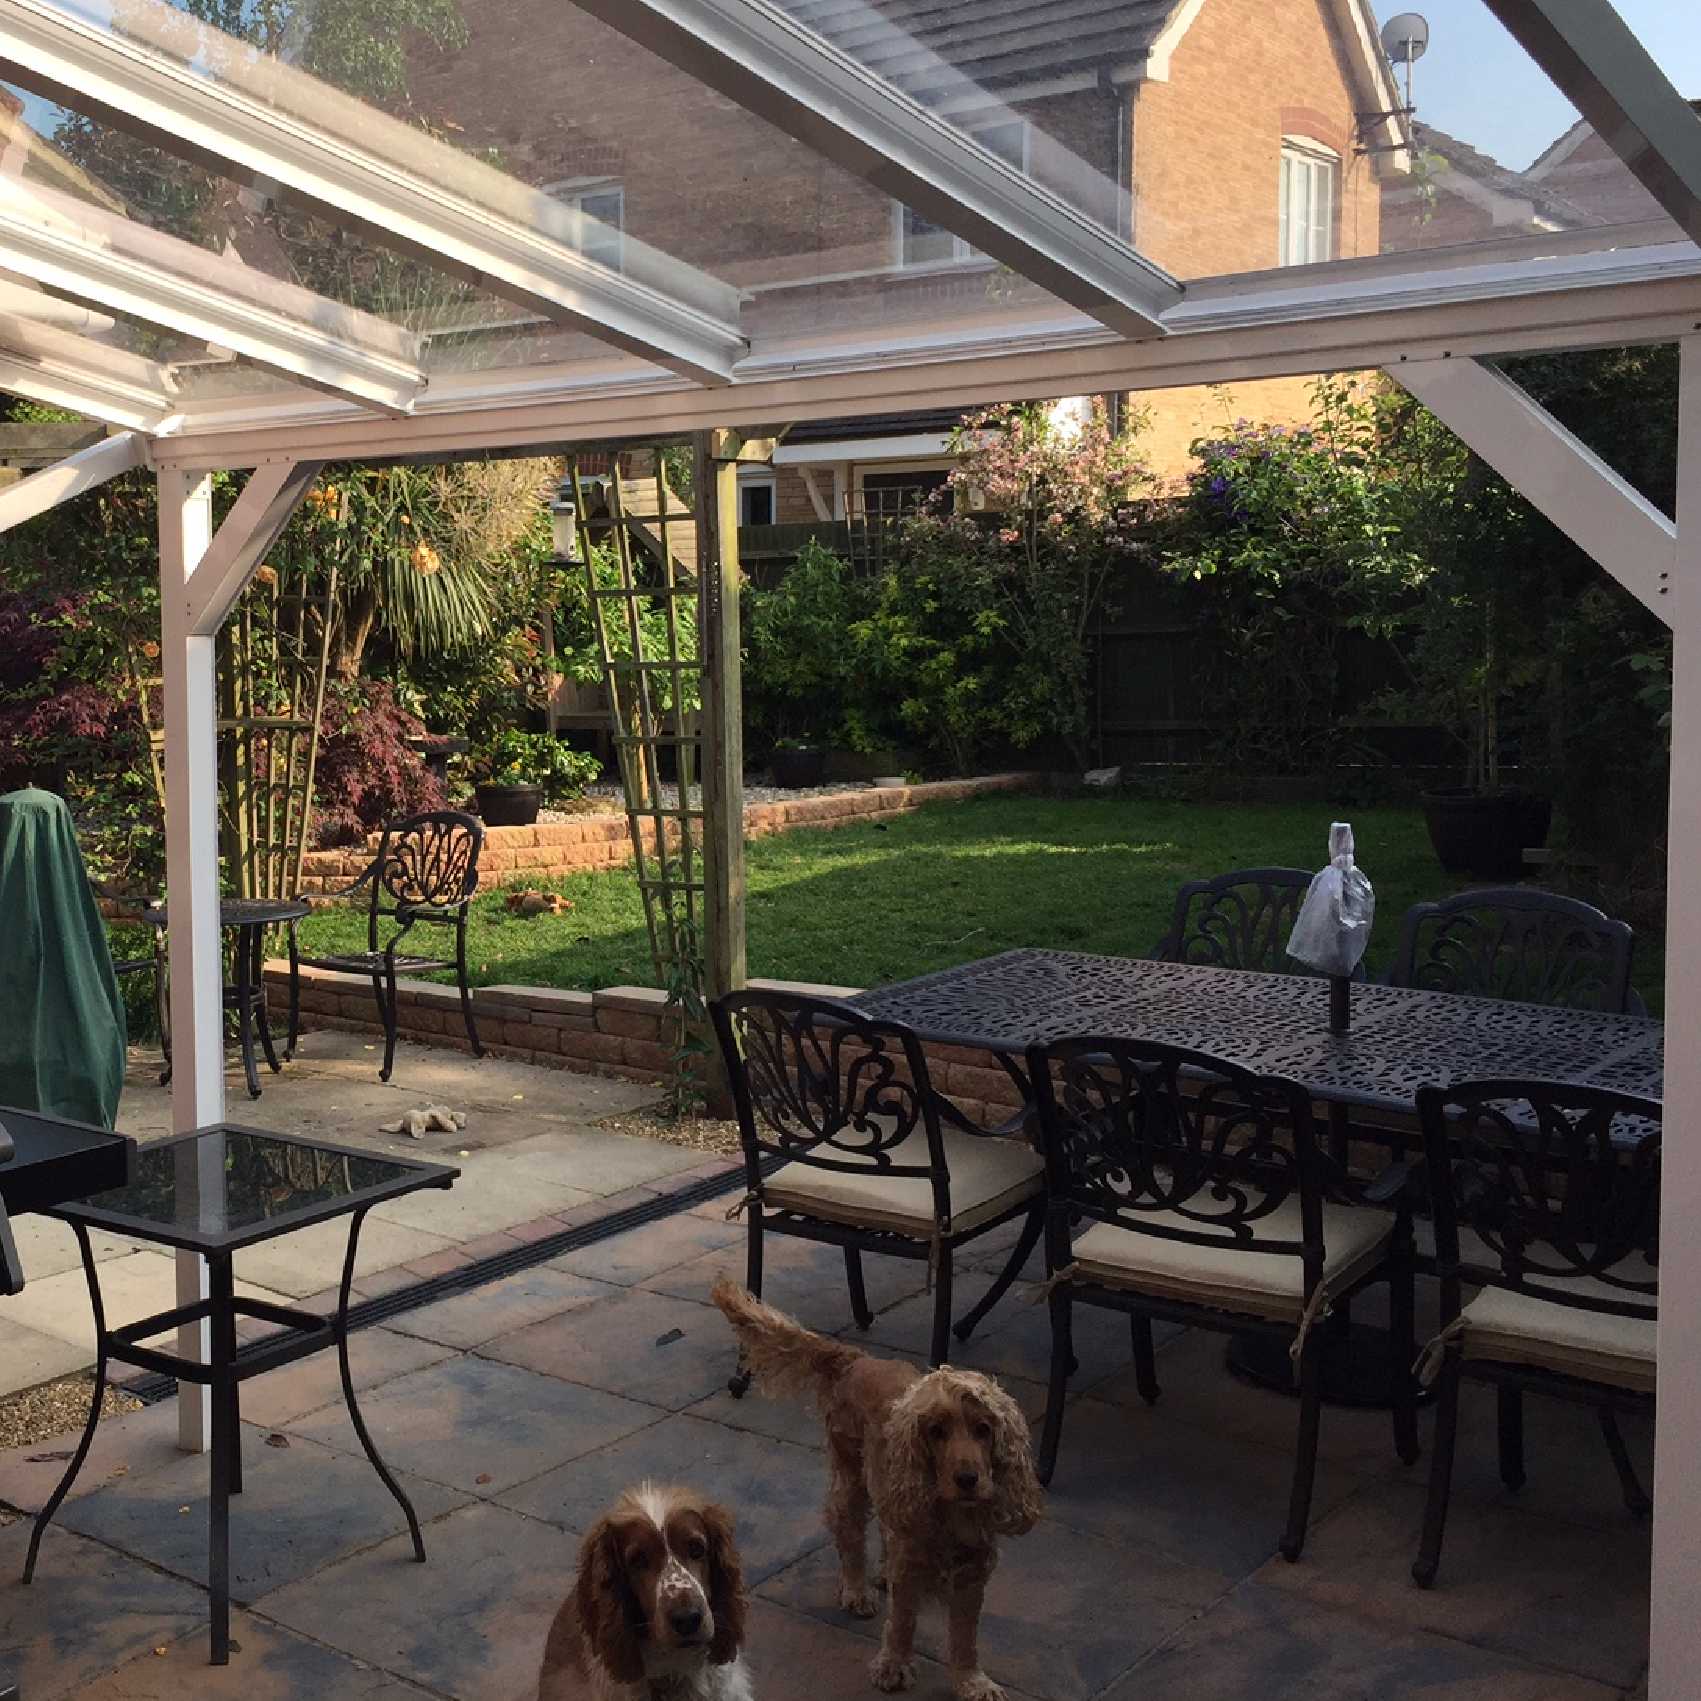 Affordable Omega Smart Lean-To Canopy, White UNGLAZED for 6mm Glazing - 9.8m (W) x 2.0m (P), (5) Supporting Posts